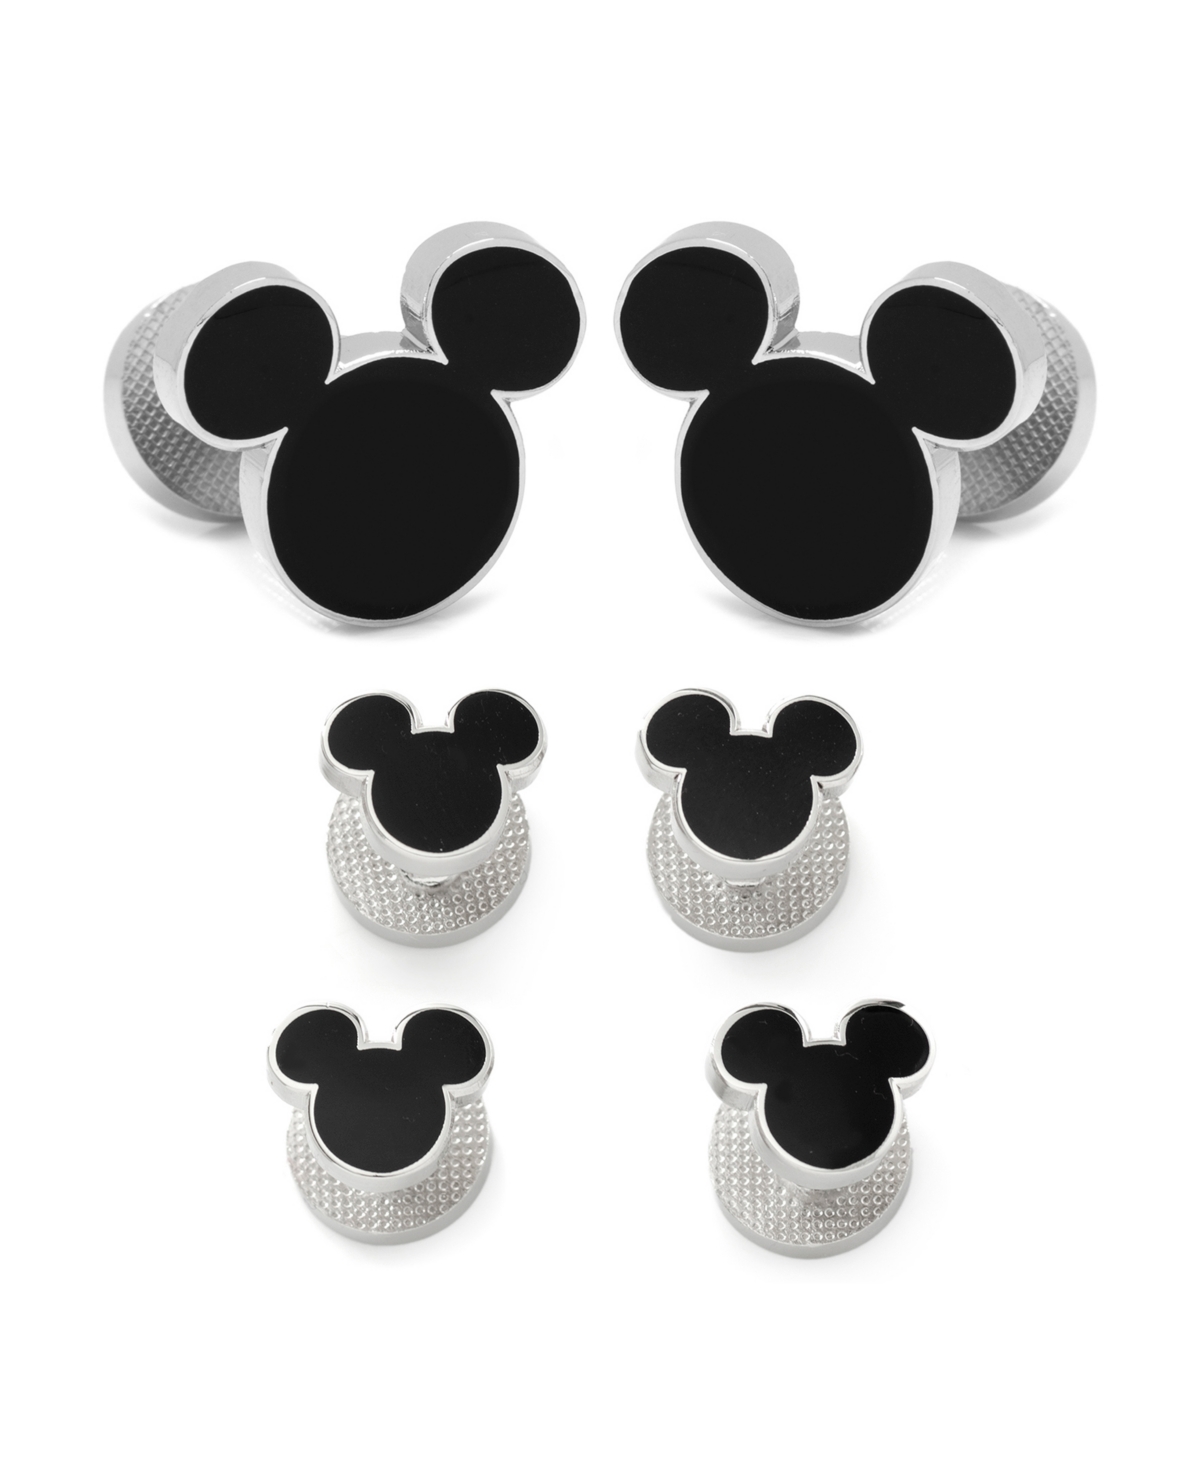 Men's Mickey Mouse Silhouette Cufflinks and Stud Set, 6 Piece Set - Black